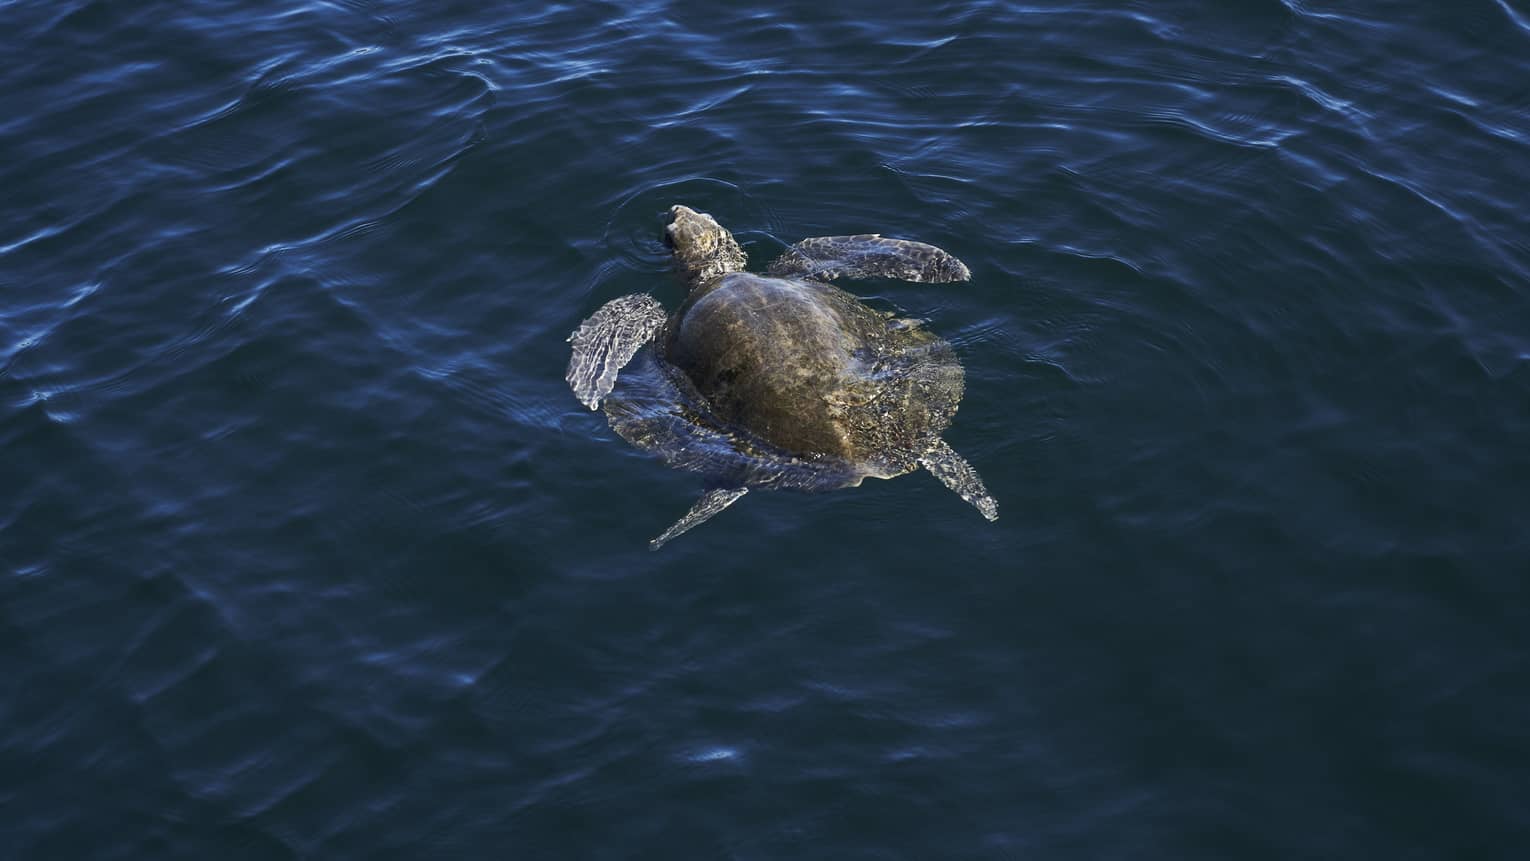 View from above of a majestic sea turtle, its flippers outstretched, swimming at the surface of the midnight blue ocean.